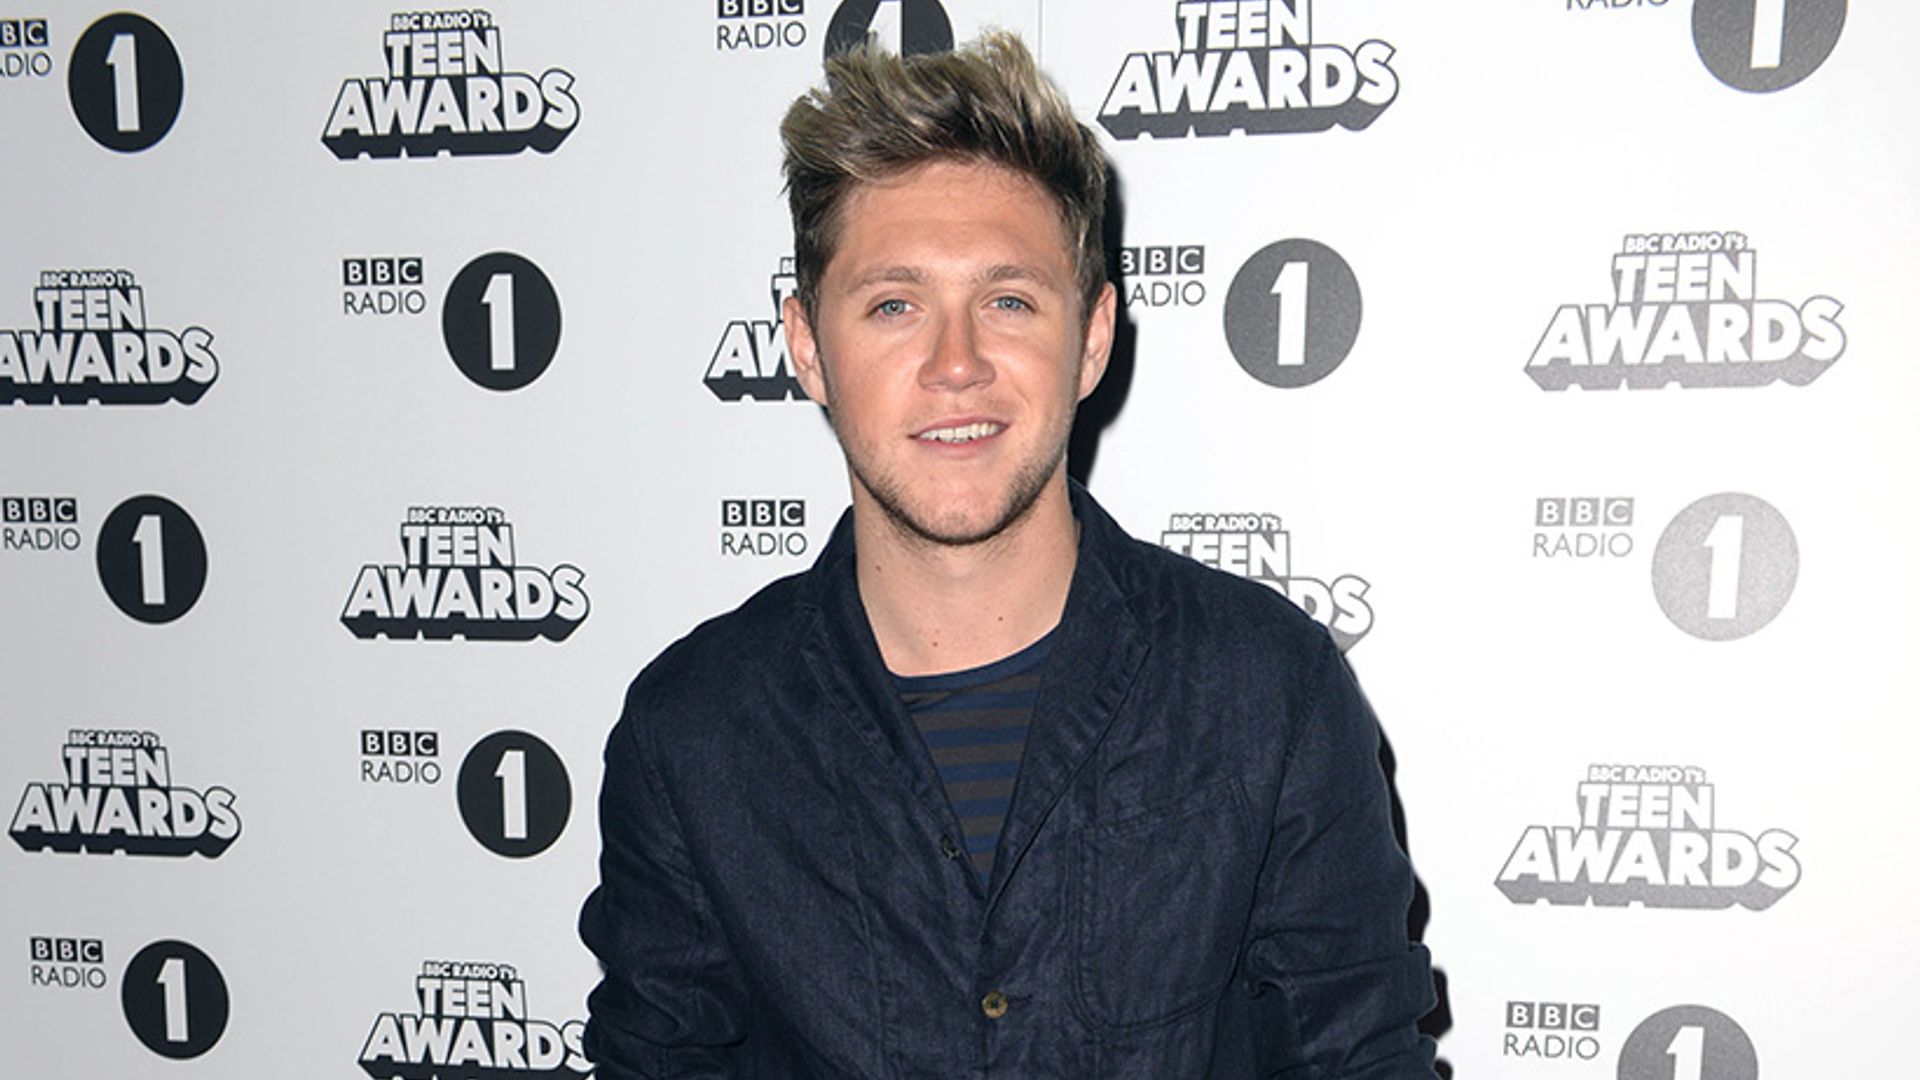 Niall Horan: news, photos, facts, twitter, girlfriend, tattoos and more...